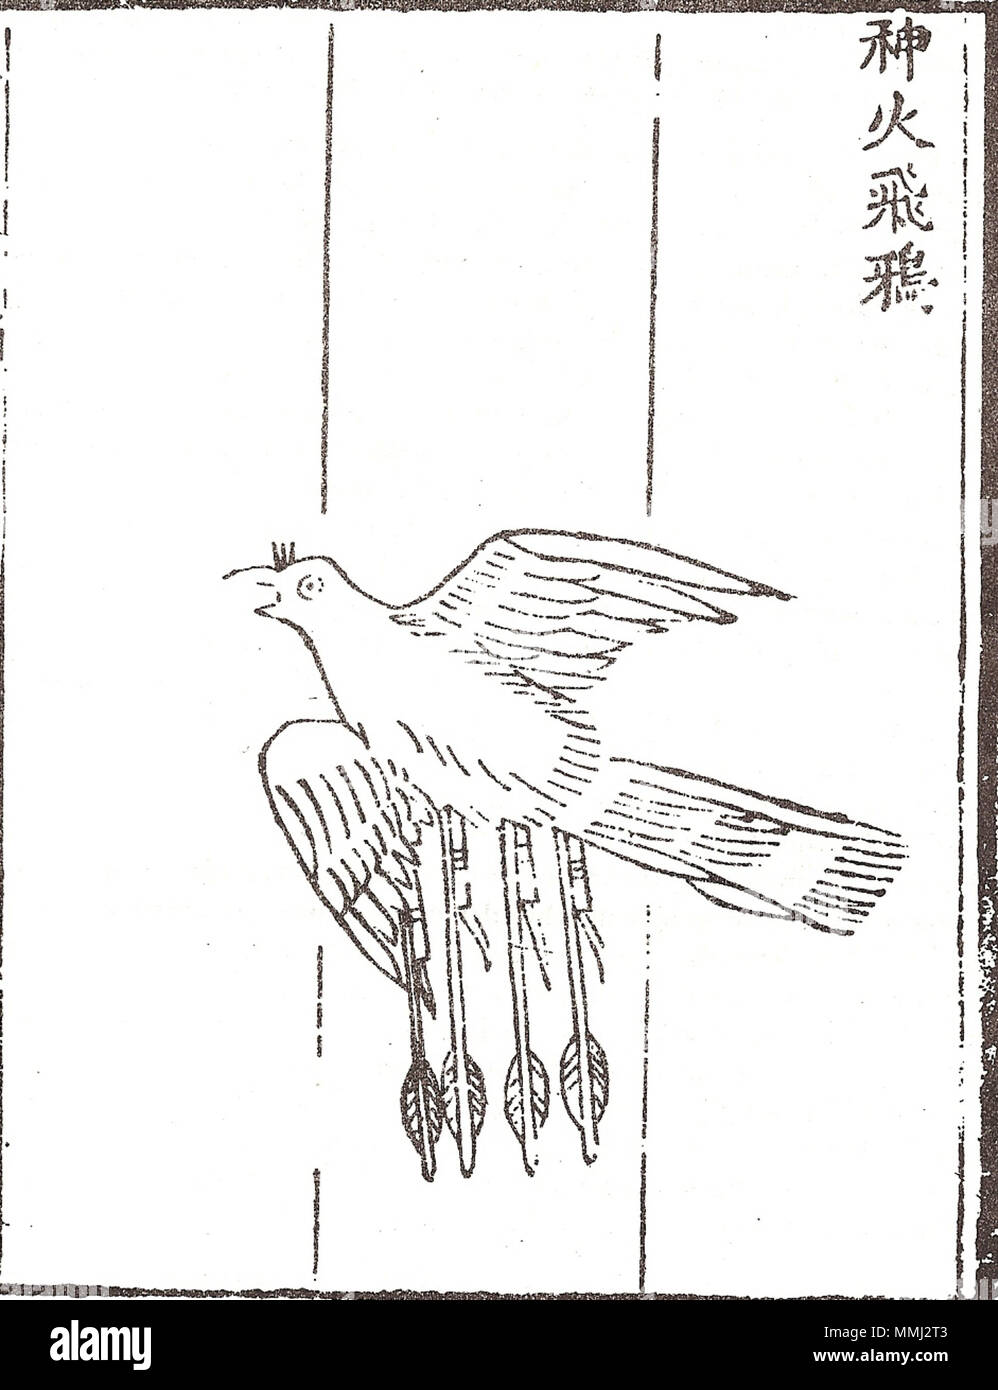 . English: The 'Flying Crow with Magic Fire', an aerodynamic winged rocket bomb from the Chinese military compendium of the Fire Drake Manual, or Huolongjing, written in the mid 14th century with a preface added in 1412. Joseph Needham writes: 'The idea was doubtless derived from the use of expendable birds carrying glowing tinder wherewith to set on fire the roofs of the enemy city. But the provisions of wings or fins for increasing aerodynamic stability long preceded anything of the same kind elsewhere in the world. And the provision of an explosive payload was also a new development.' (Capt Stock Photo